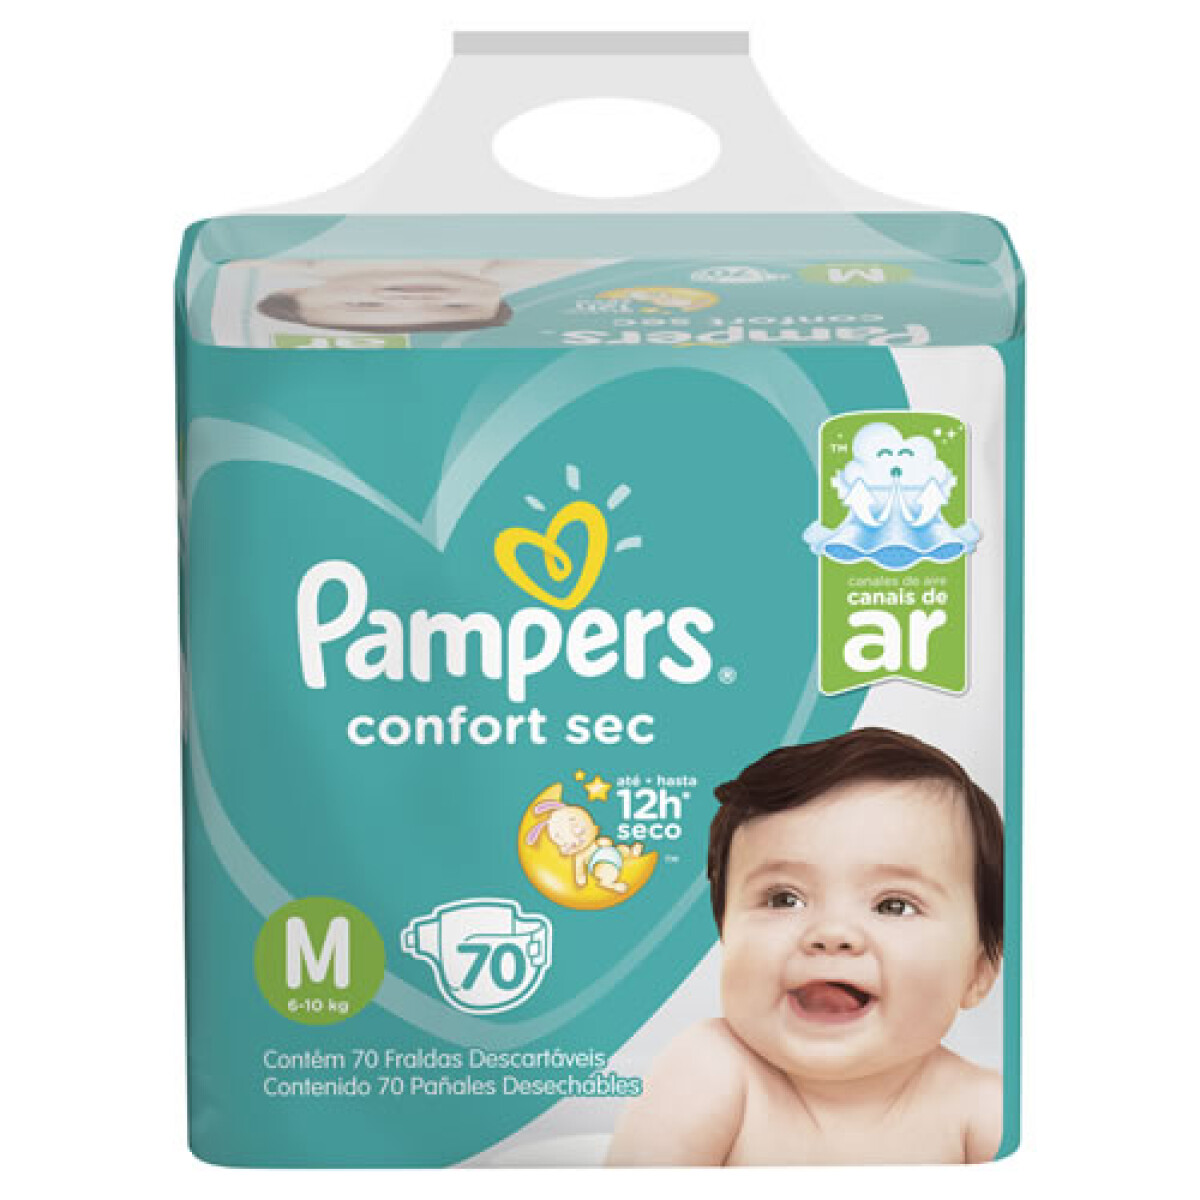 PAÑALES PAMPERS 6X CONFORT SEC FORTE BAG MEDIANO X 70 